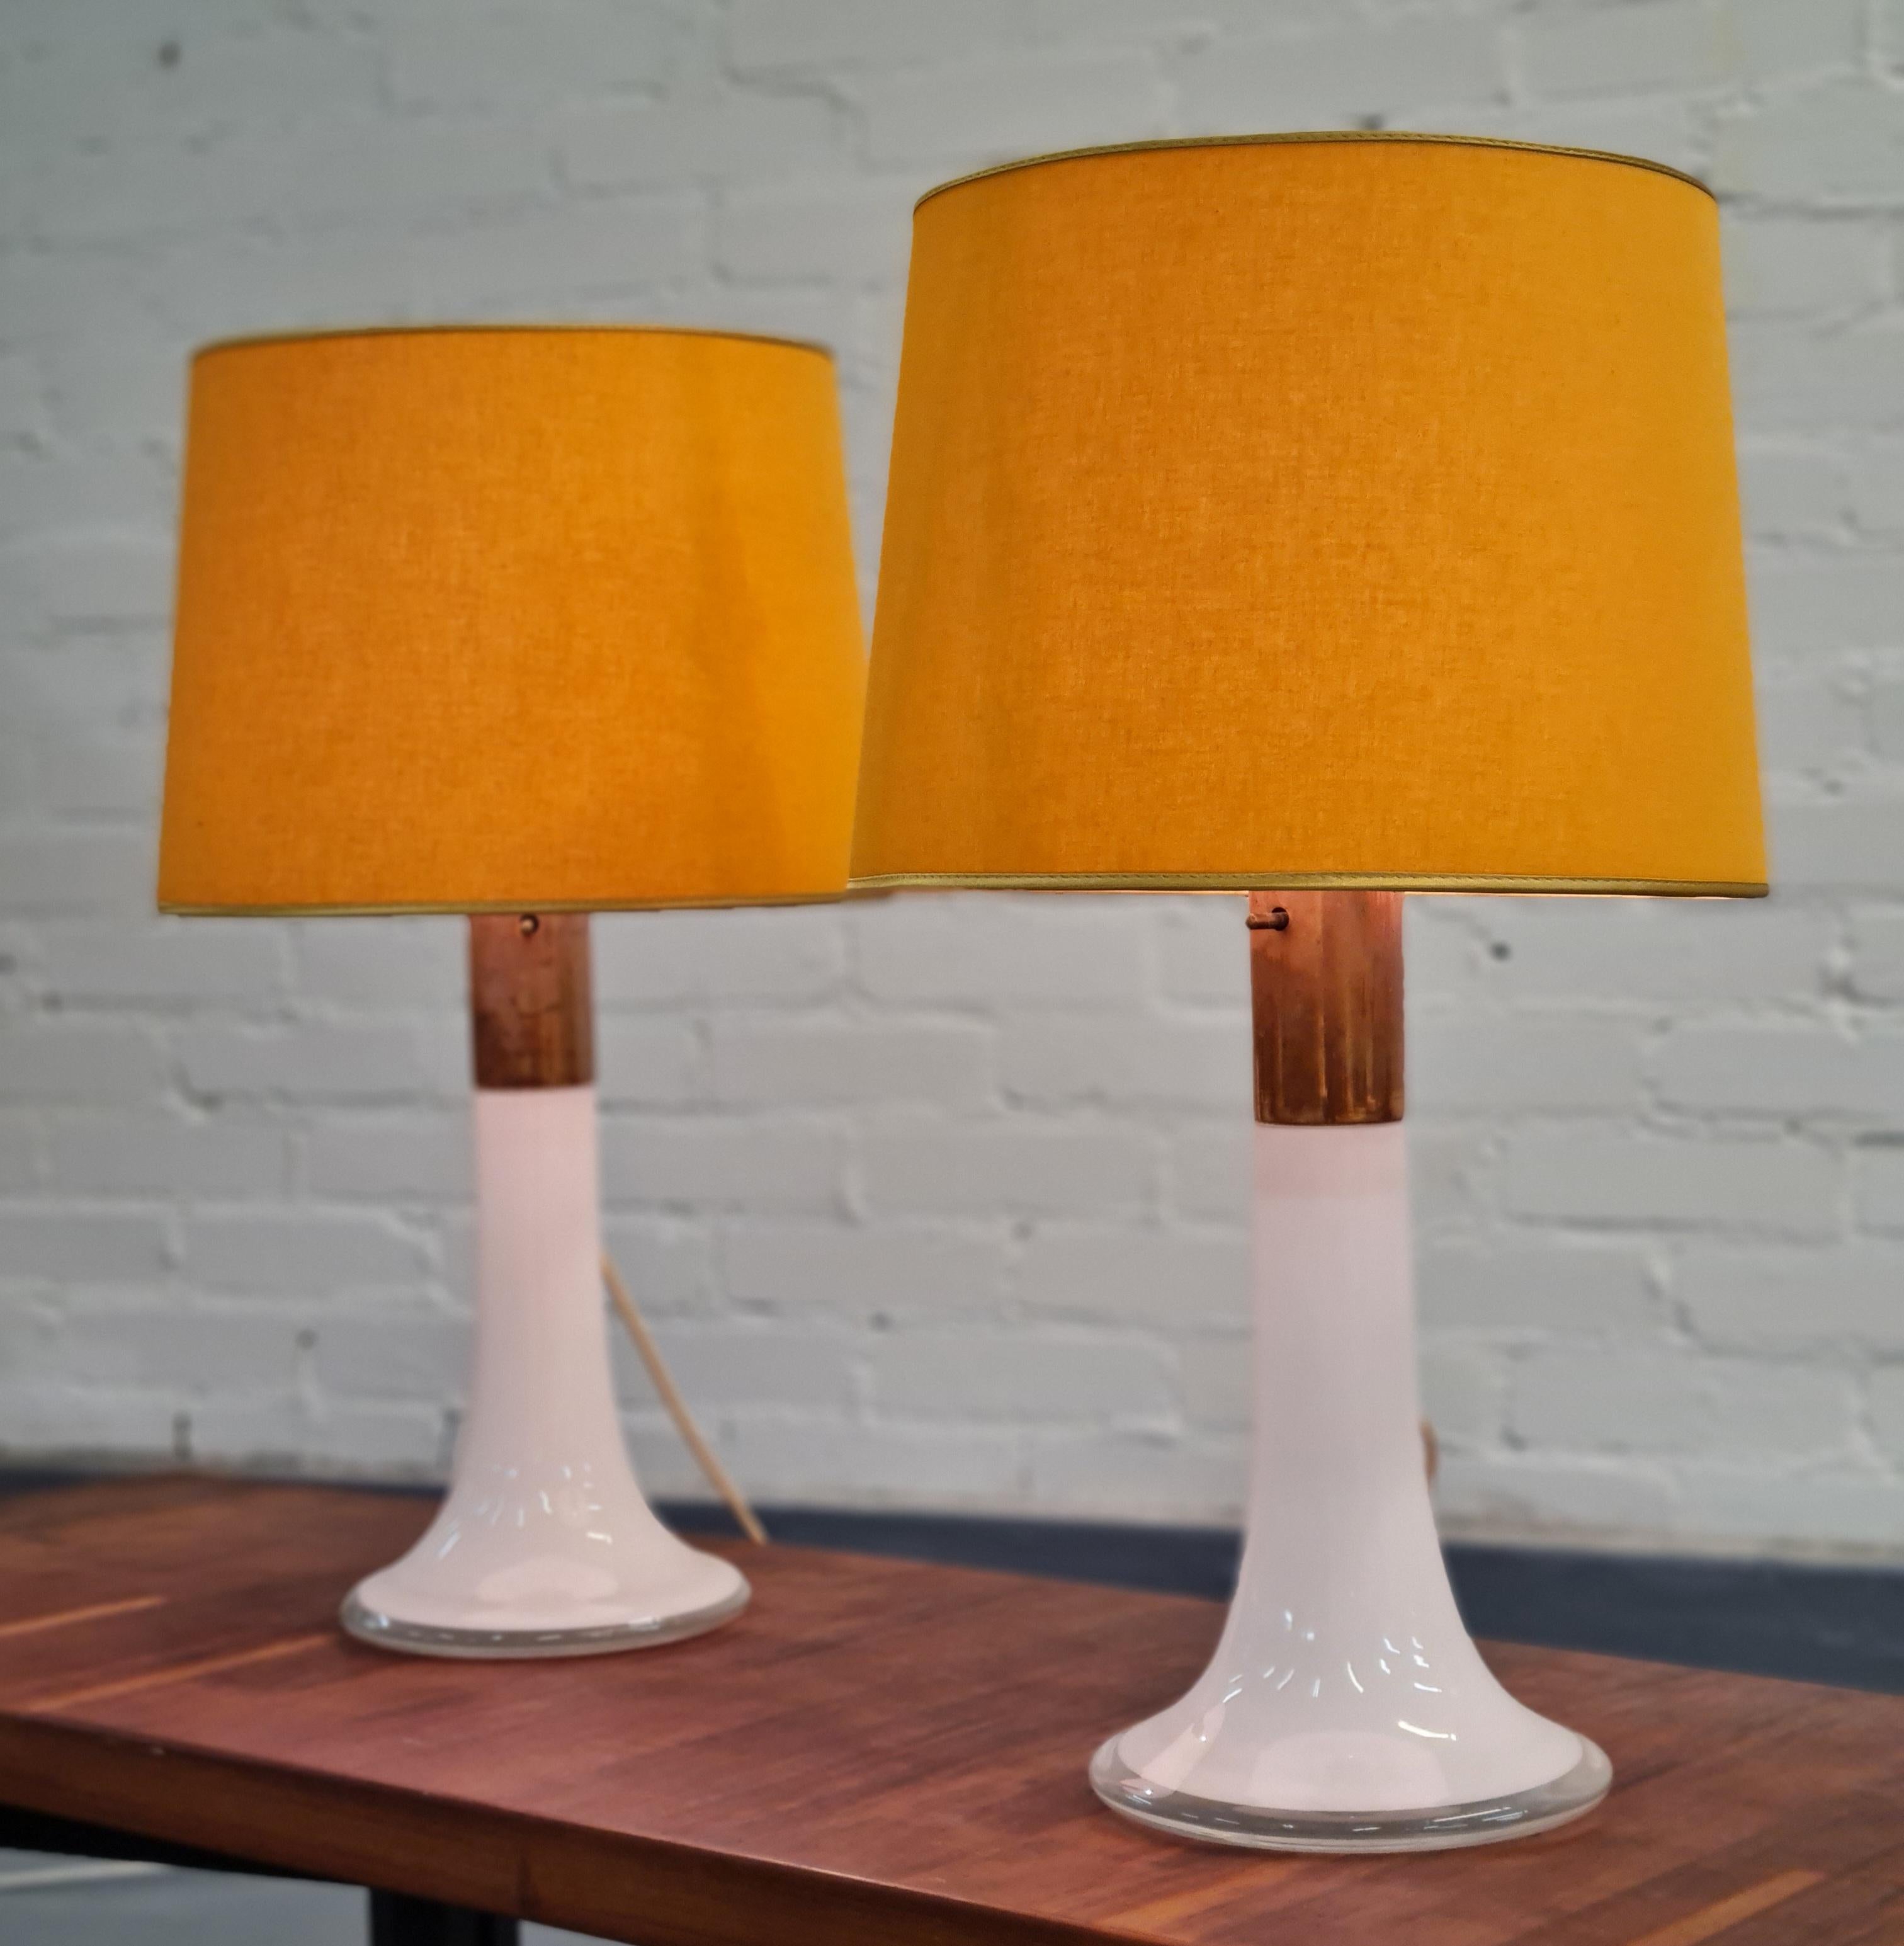 Finnish Pair of Lisa Johansson-Pape Table Lamps Model 46-017, for Orno